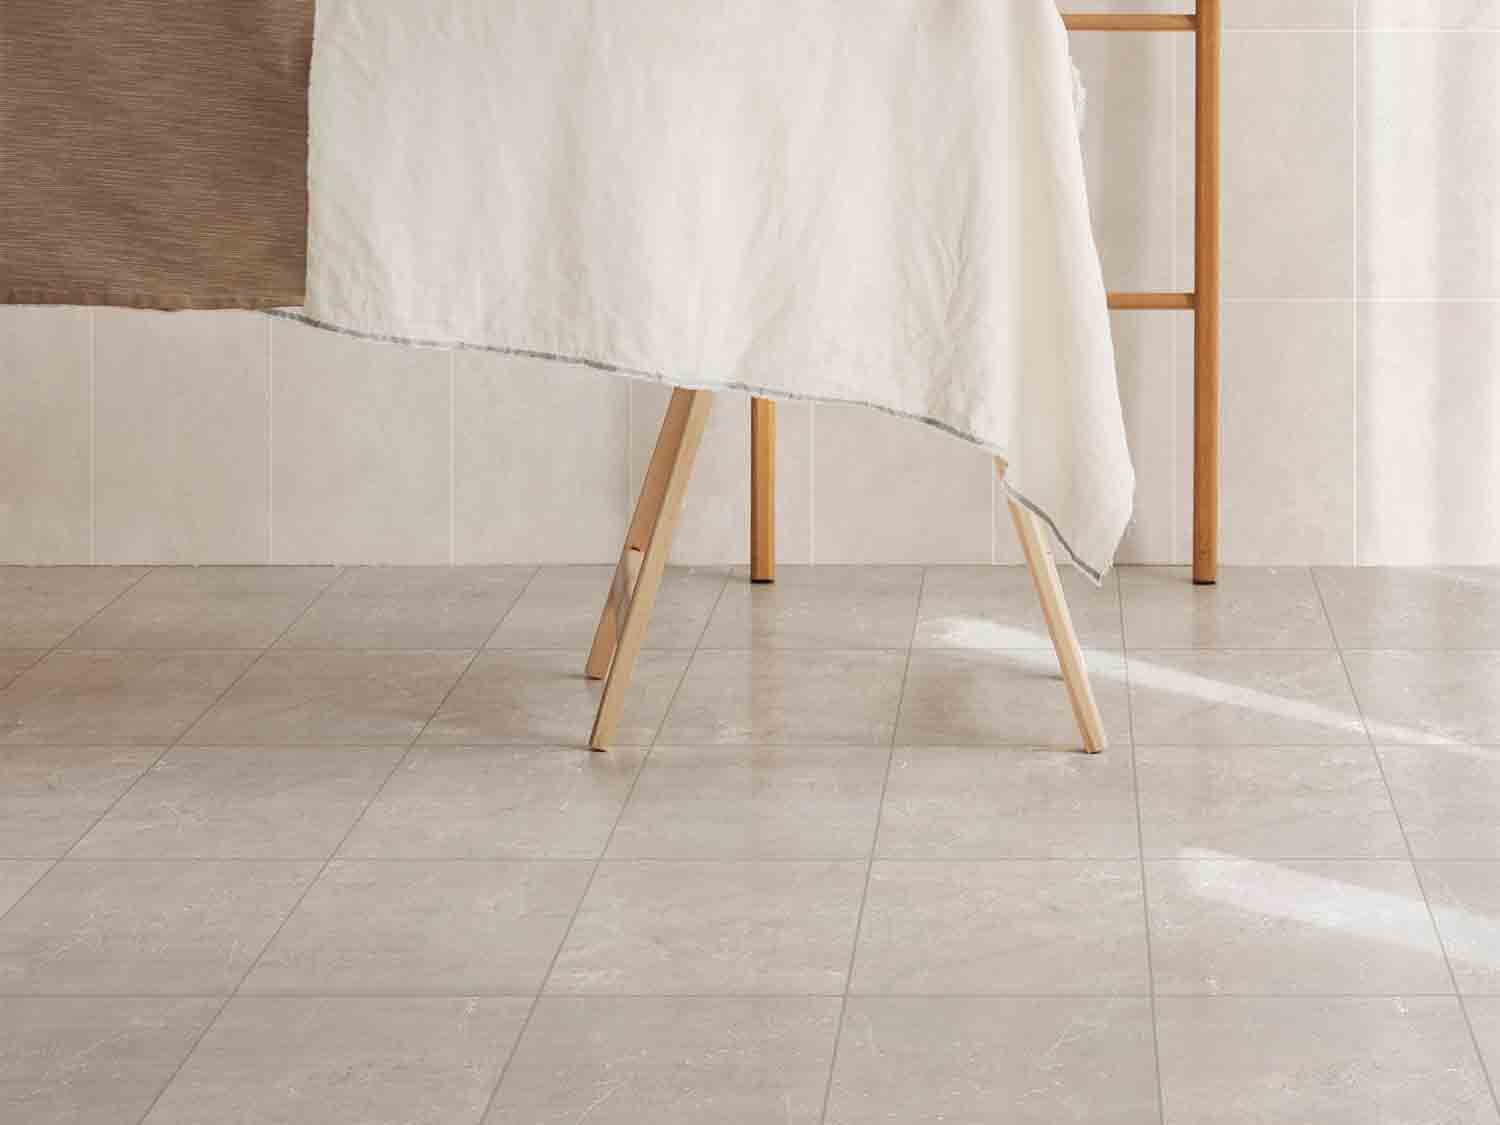 Nevis Grey Shiny Ceramic Floor Tile, What Is The Largest Floor Tile Available